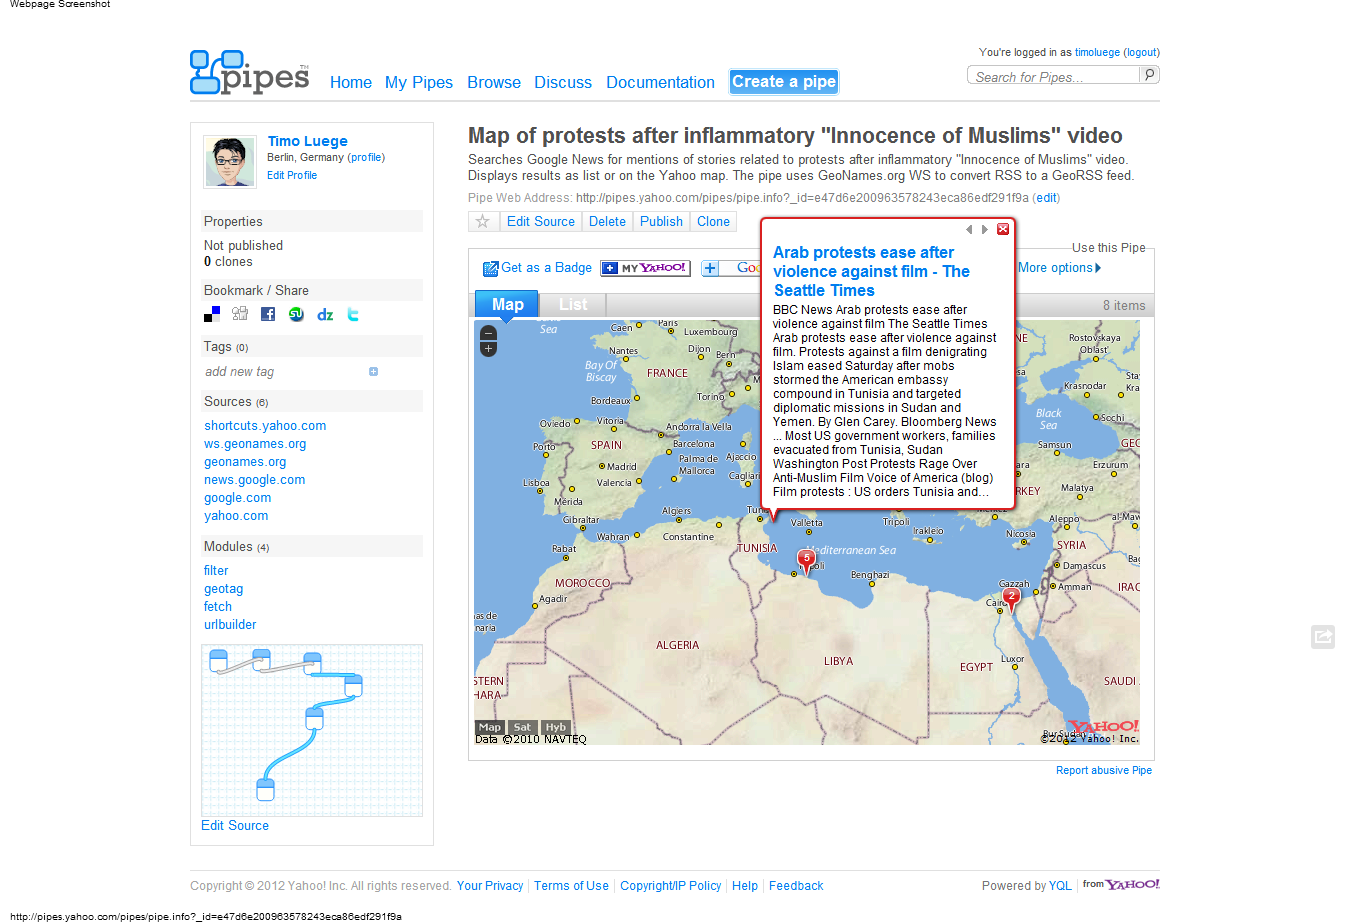 This Pipe maps news related to protests in the Arab world.